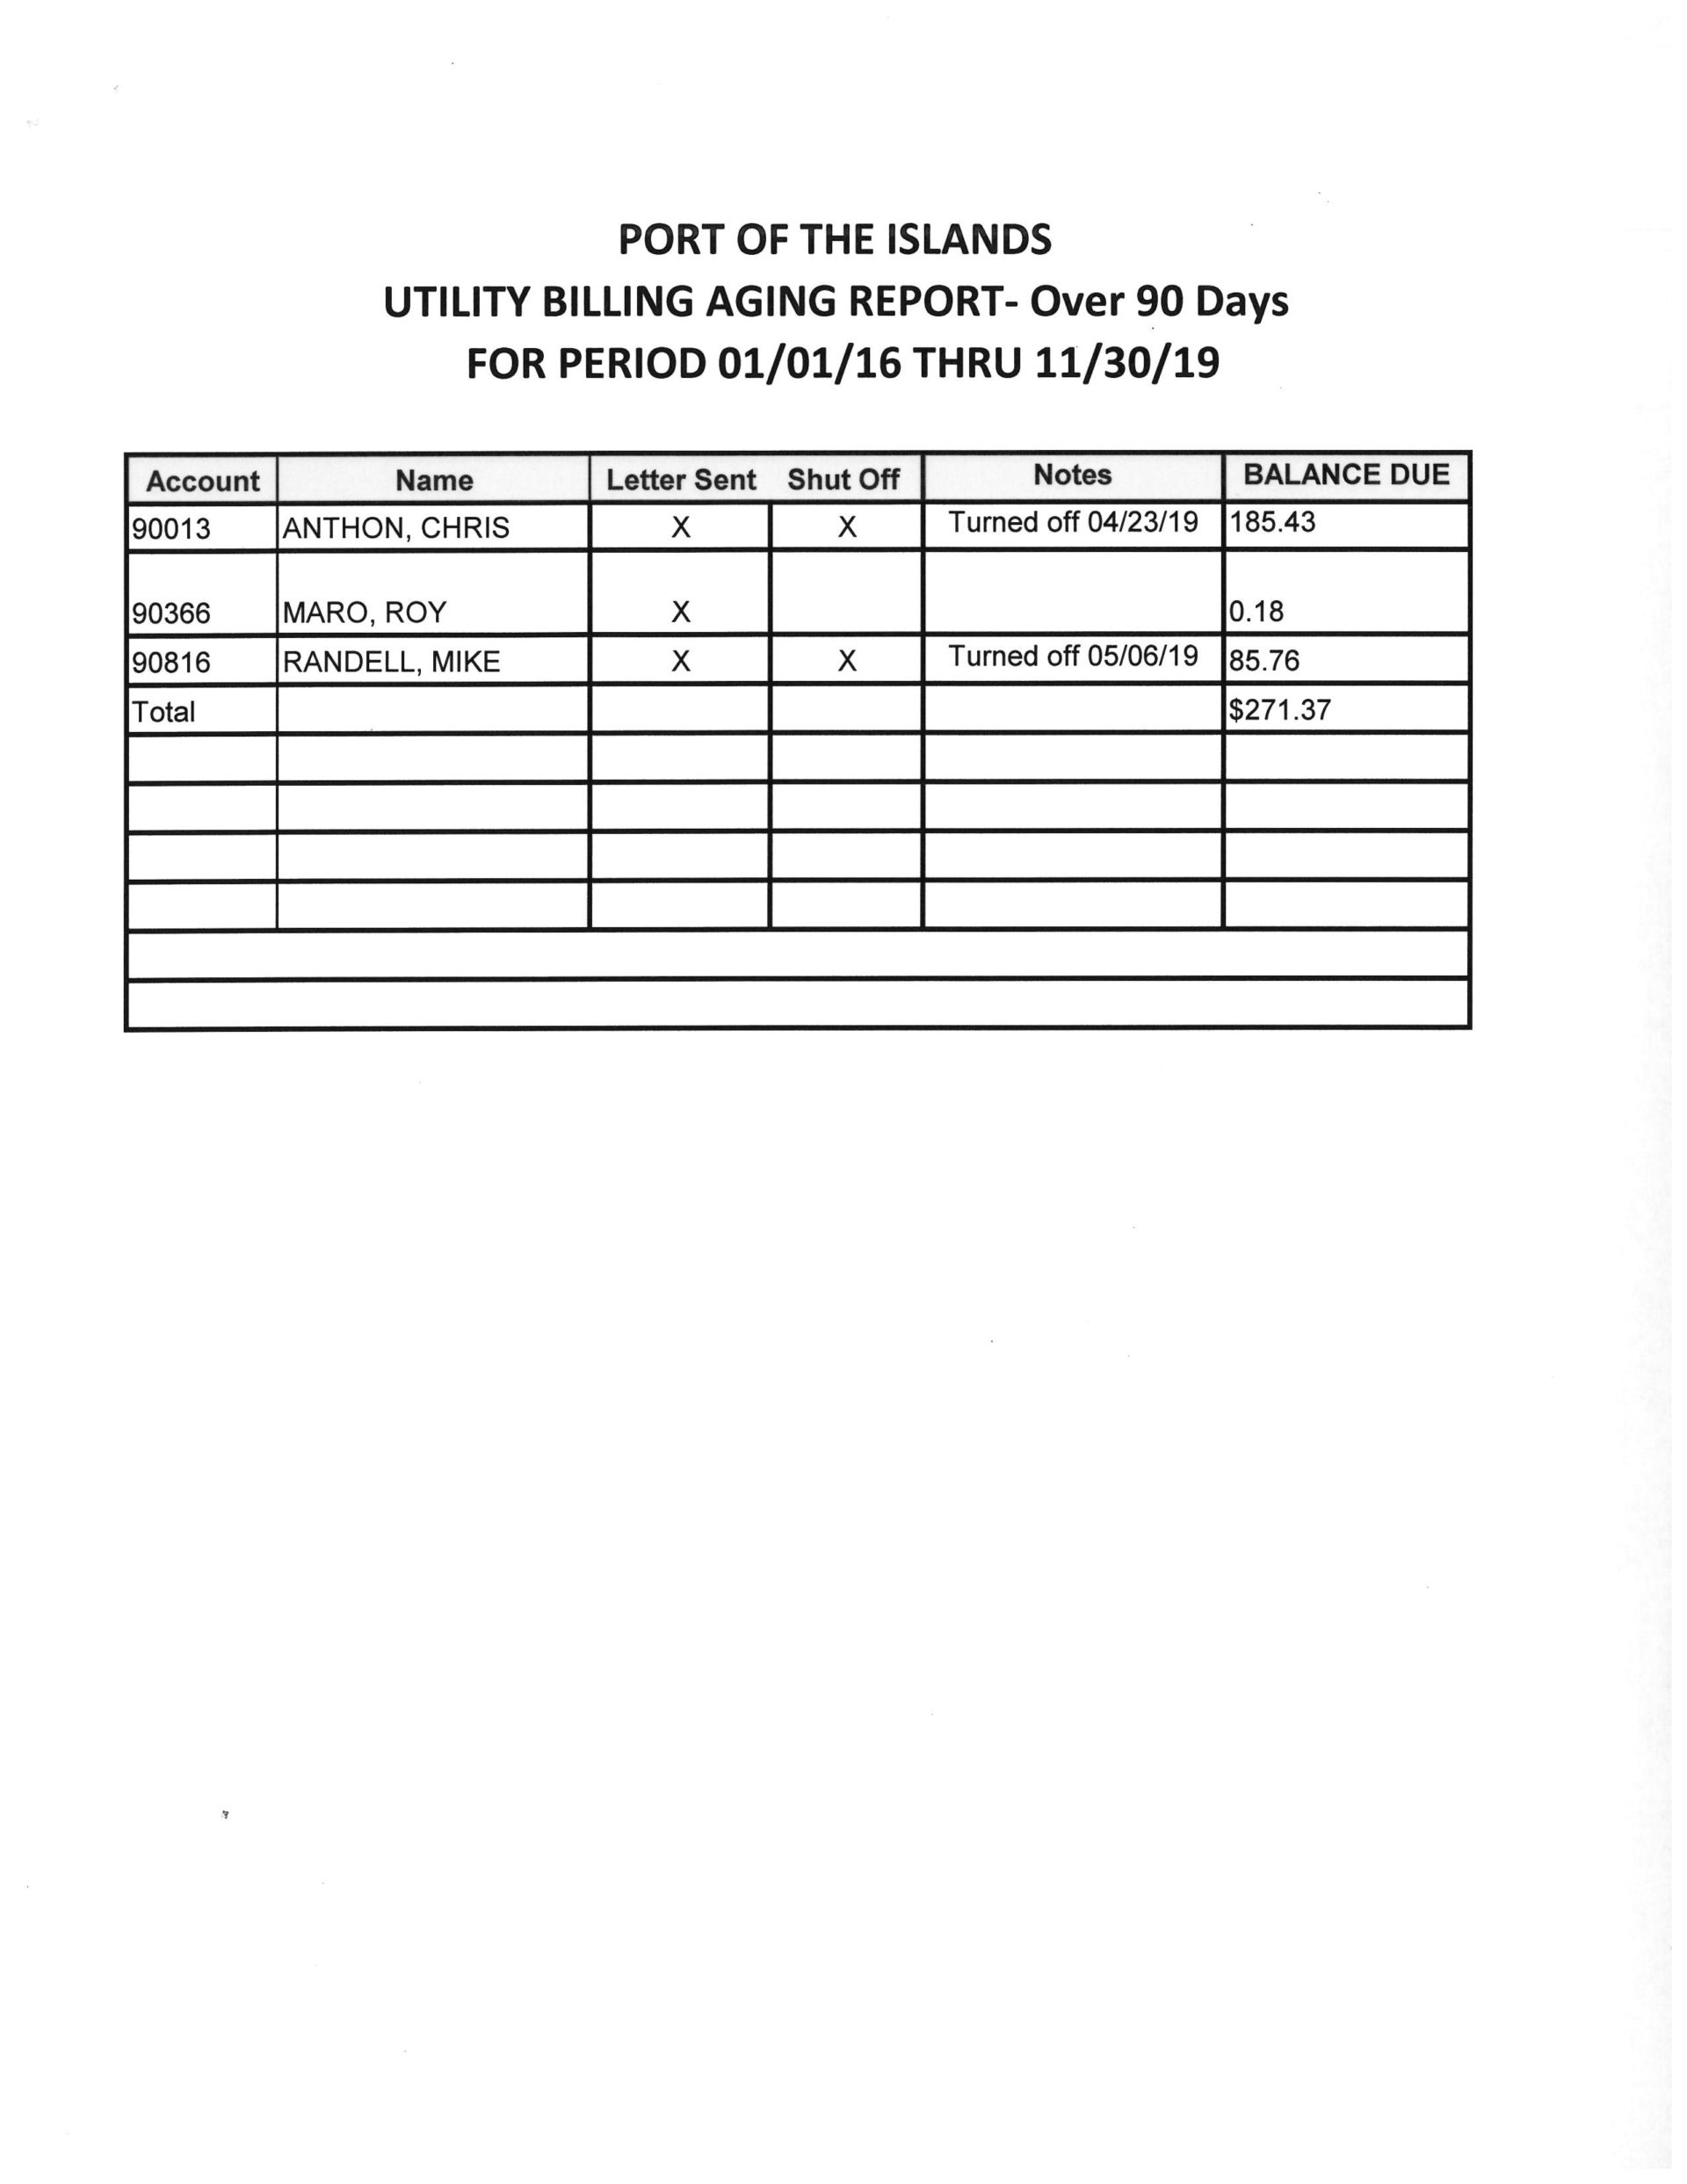 Utility Billing Aging Report for